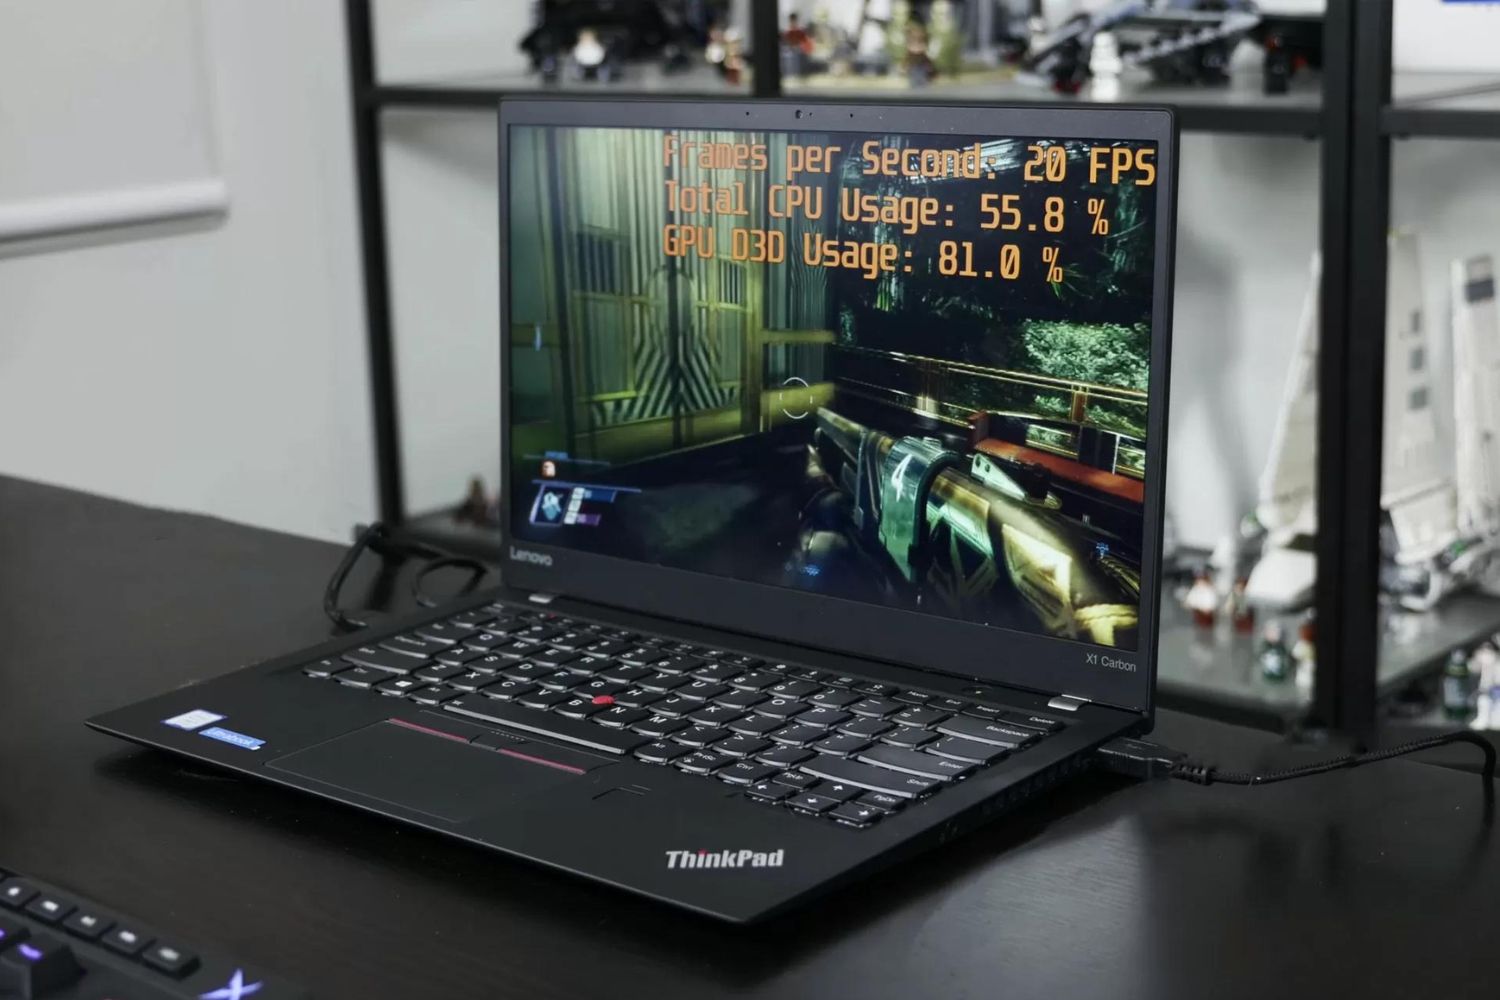 How To Play Fallout On Lenovo Ultrabook